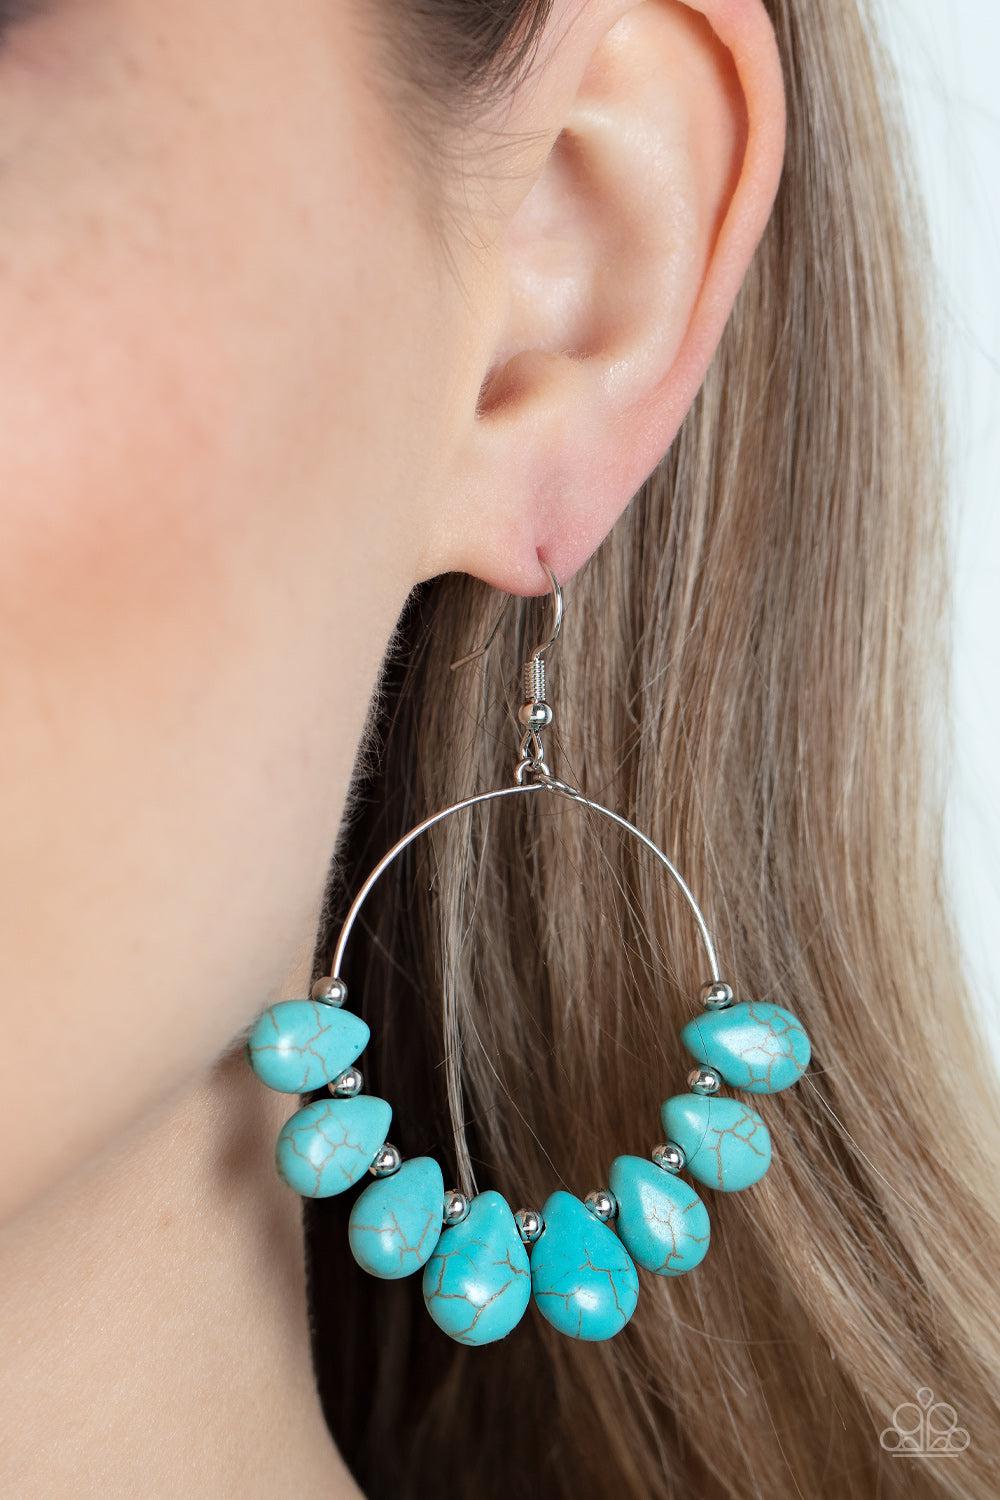 Canyon Quarry Turquoise Blue Stone Earrings - Paparazzi Accessories-on model - CarasShop.com - $5 Jewelry by Cara Jewels